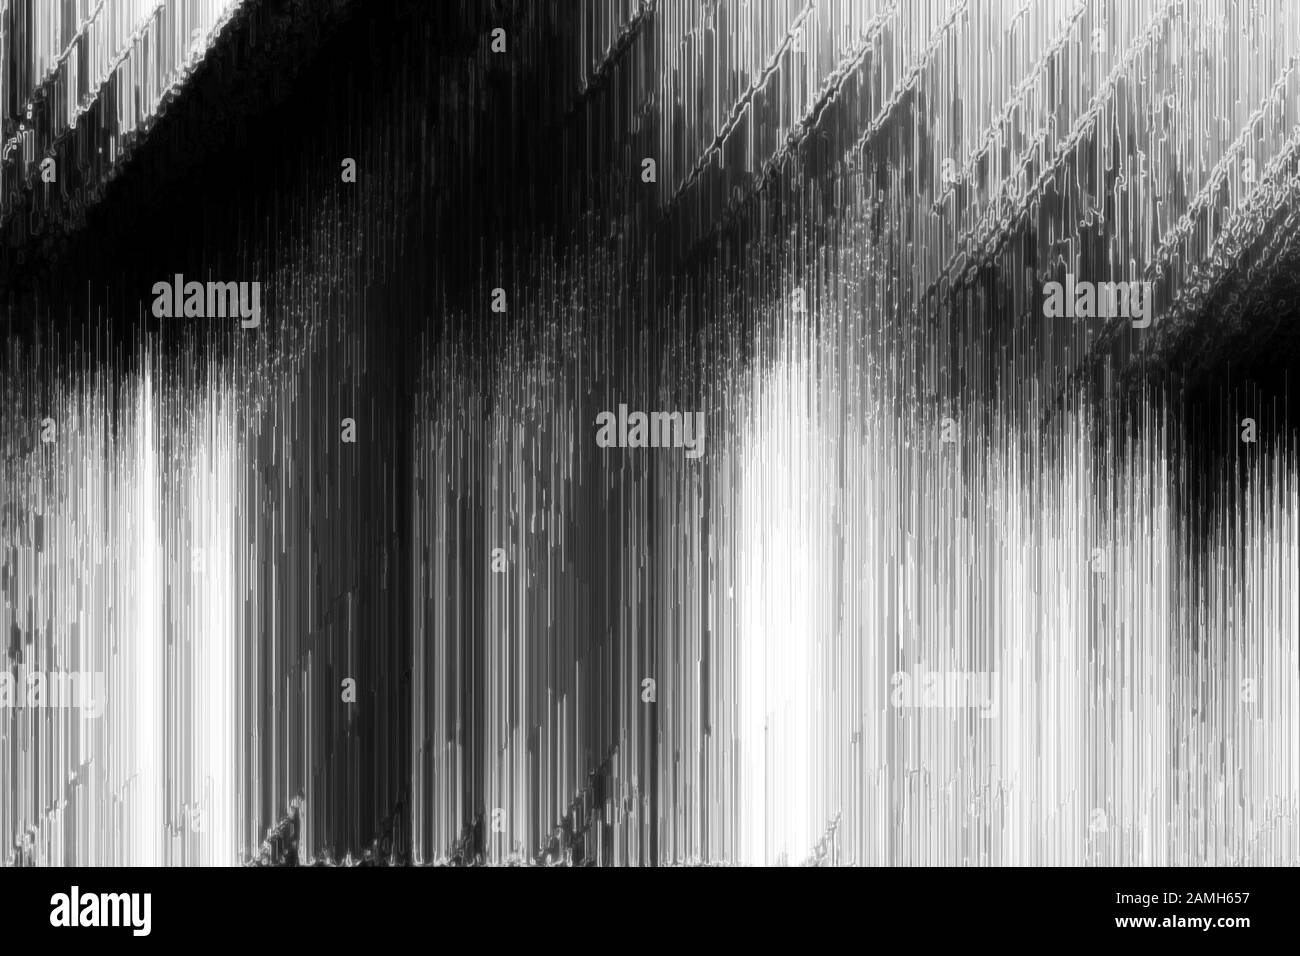 An abstract grunge textured background image Stock Photo - Alamy